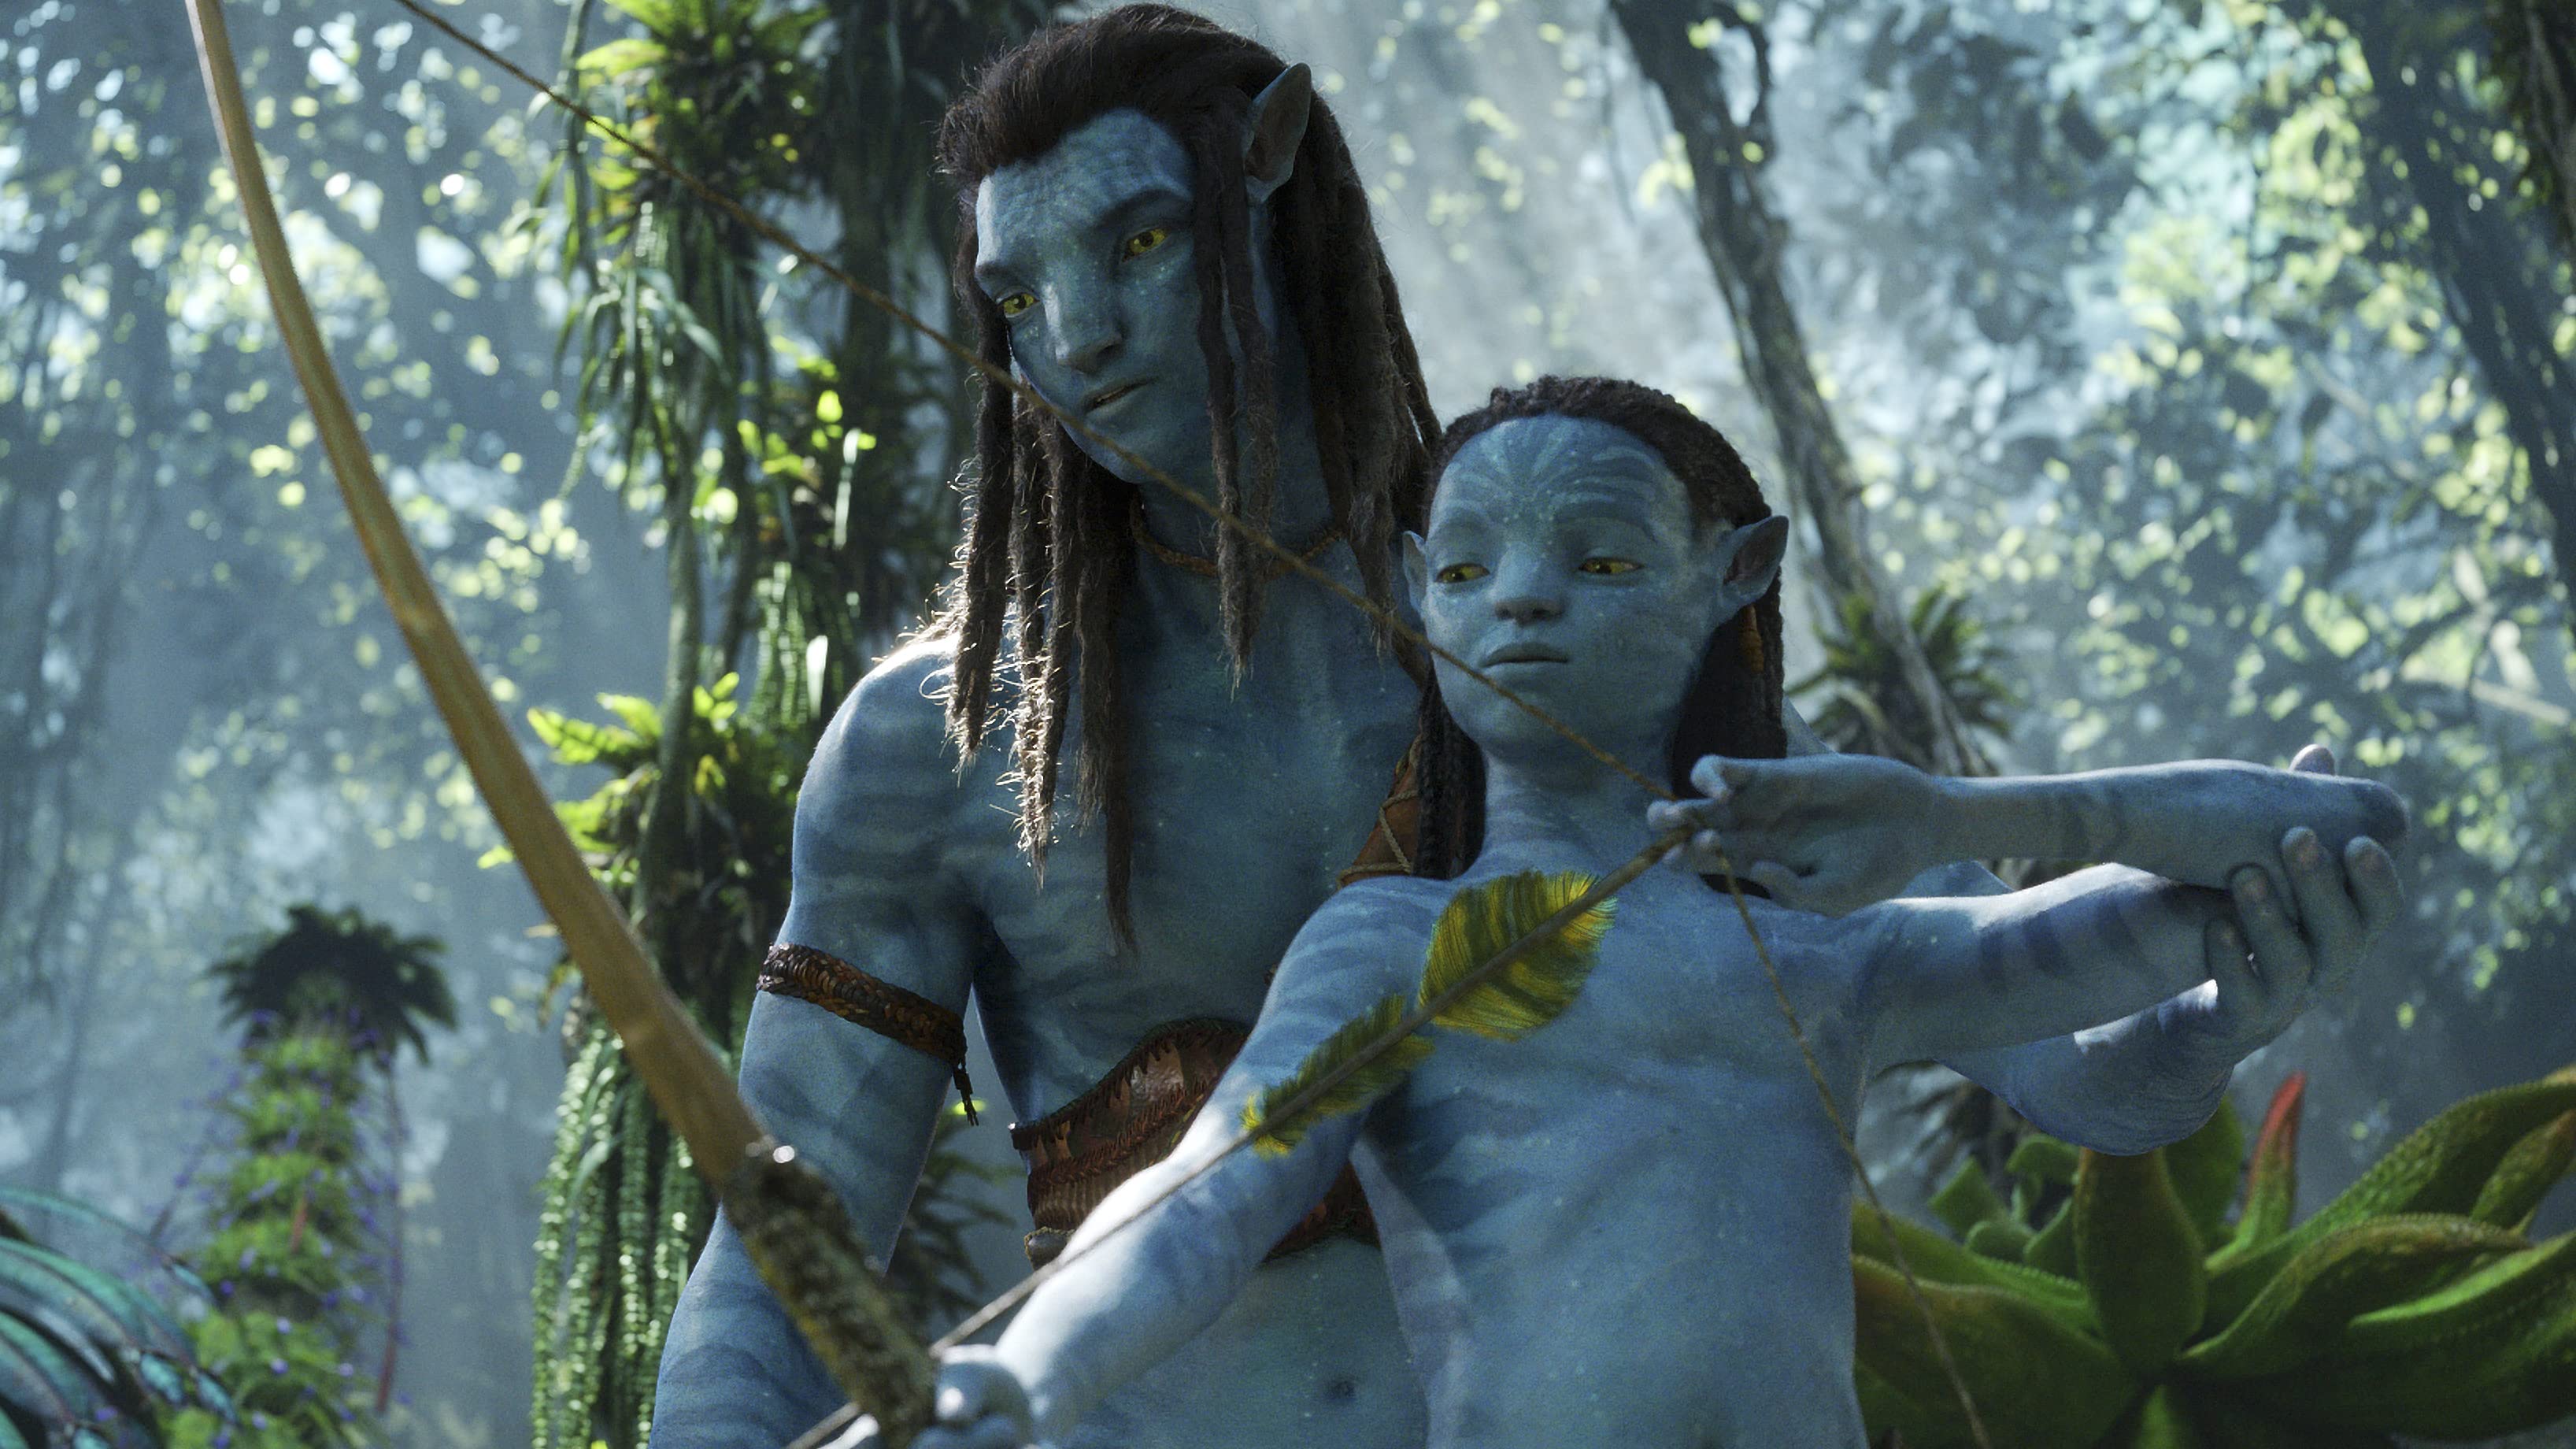 Sam Worthington as Jake Sully in Avatar 2. He is teaching his young son how to shoot a bow.